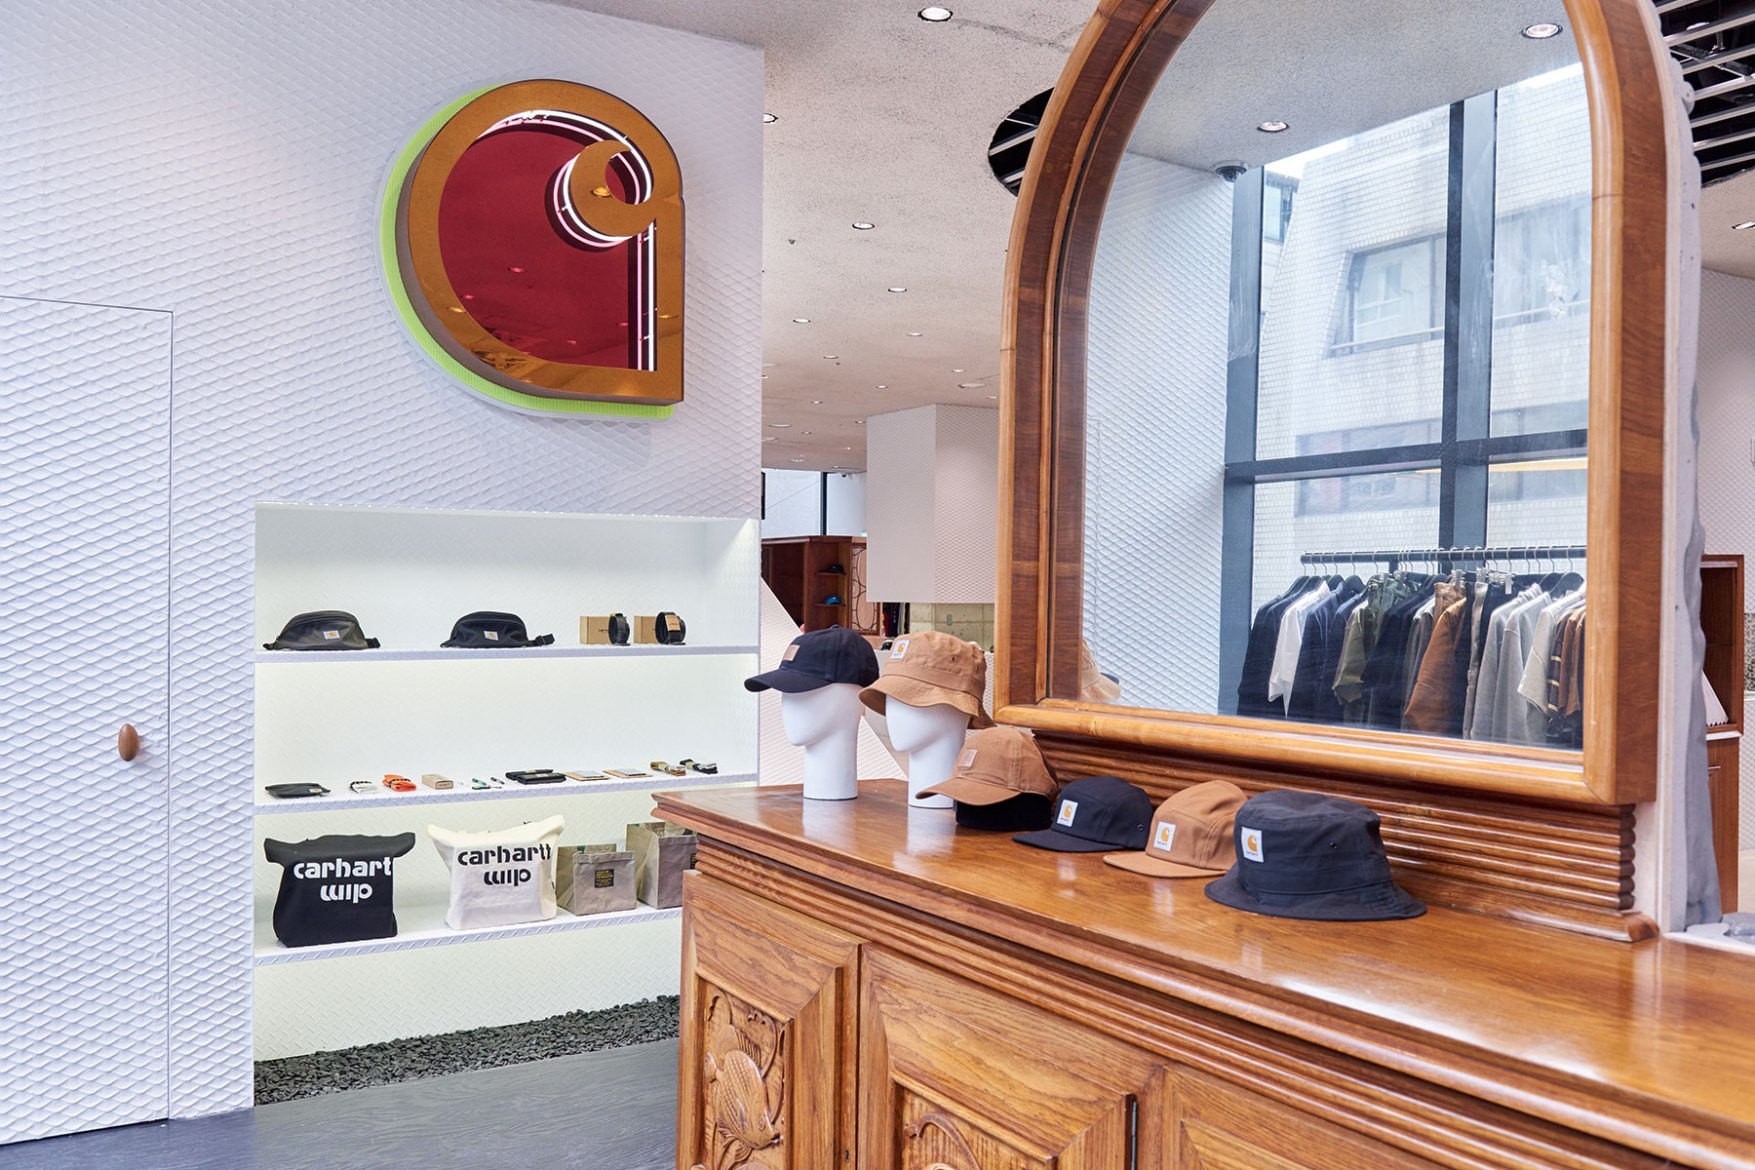 worksout hongdae seoul select shop streetwear collaborations armoire wood mirror